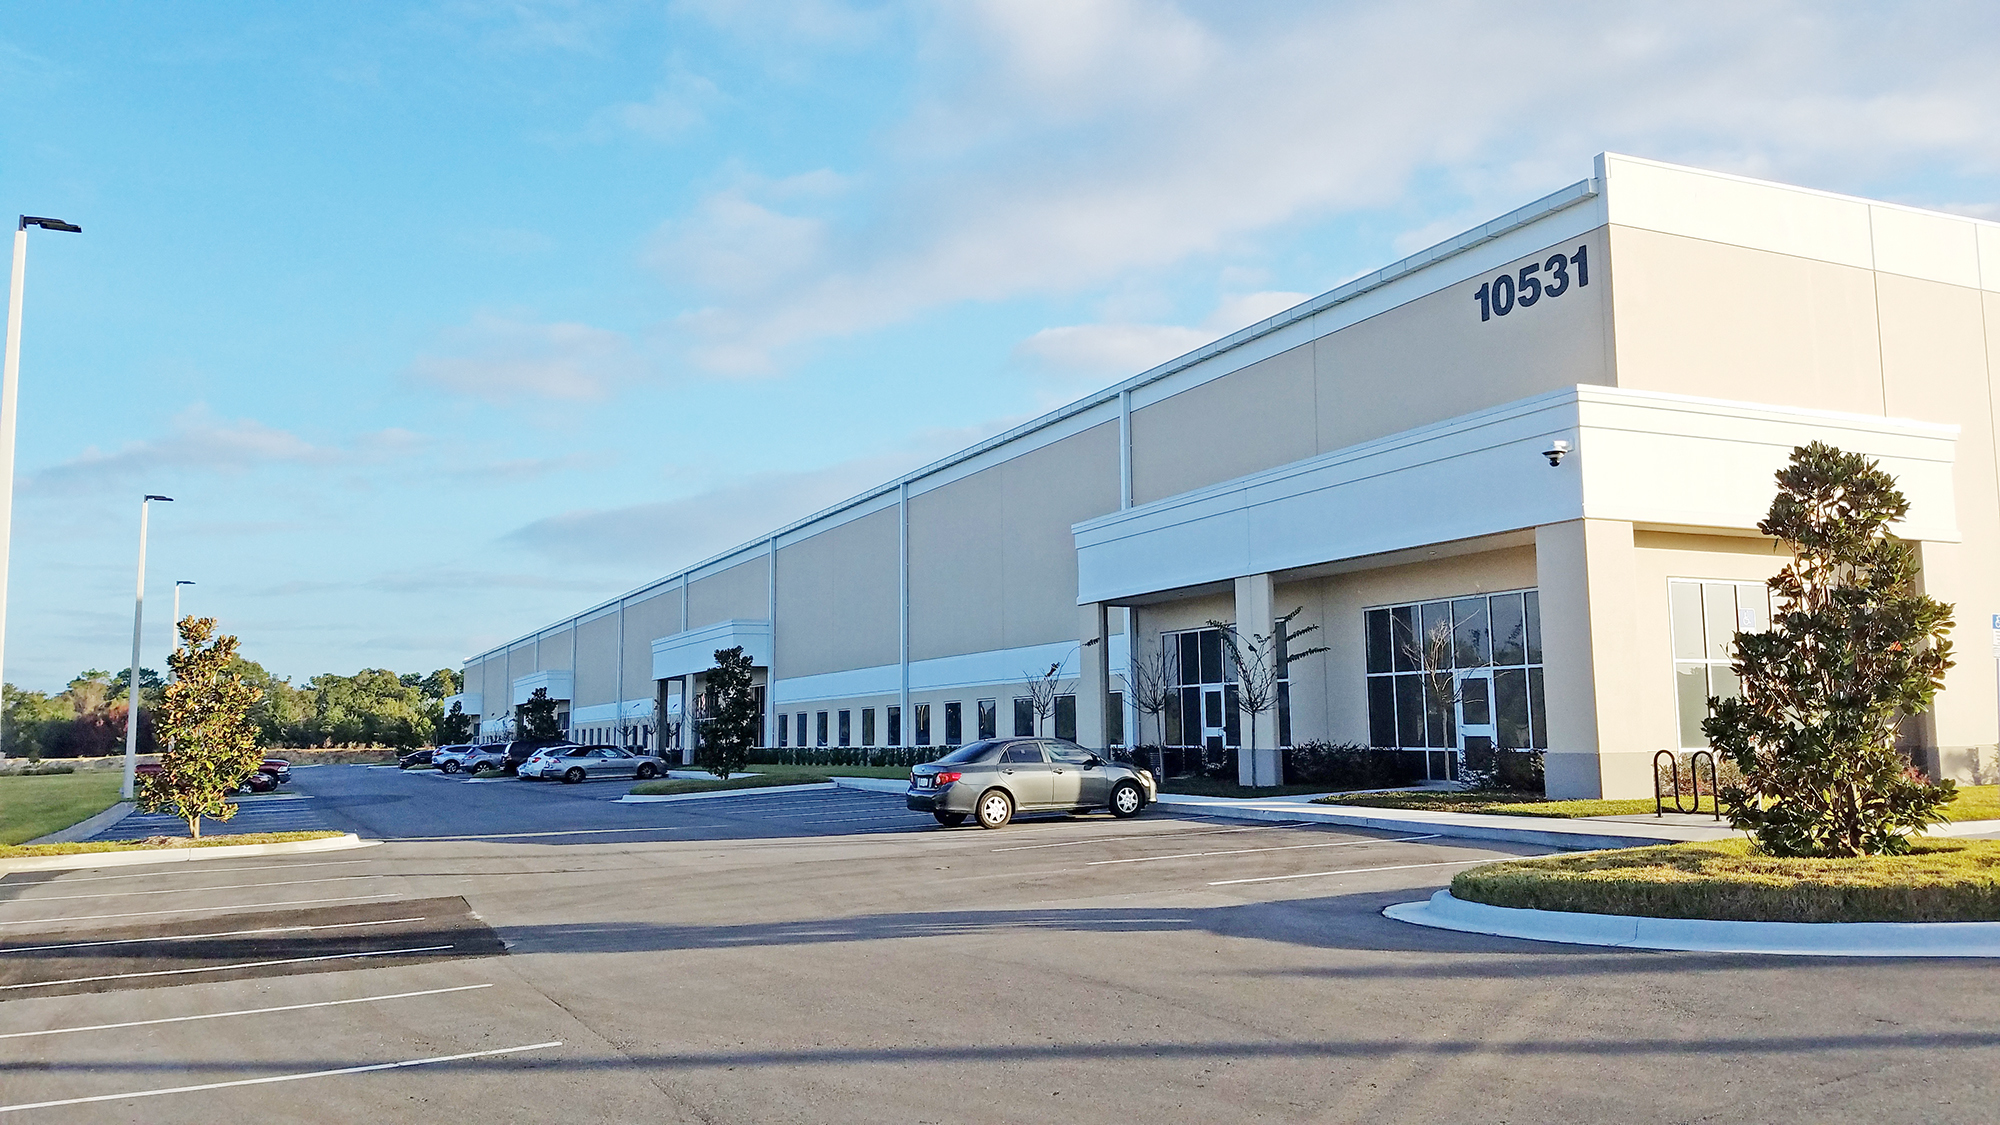 The 140,400-square-foot building Collins Aerospace will lease at 10531 Busch Drive N. in Imeson International Industrial Park.